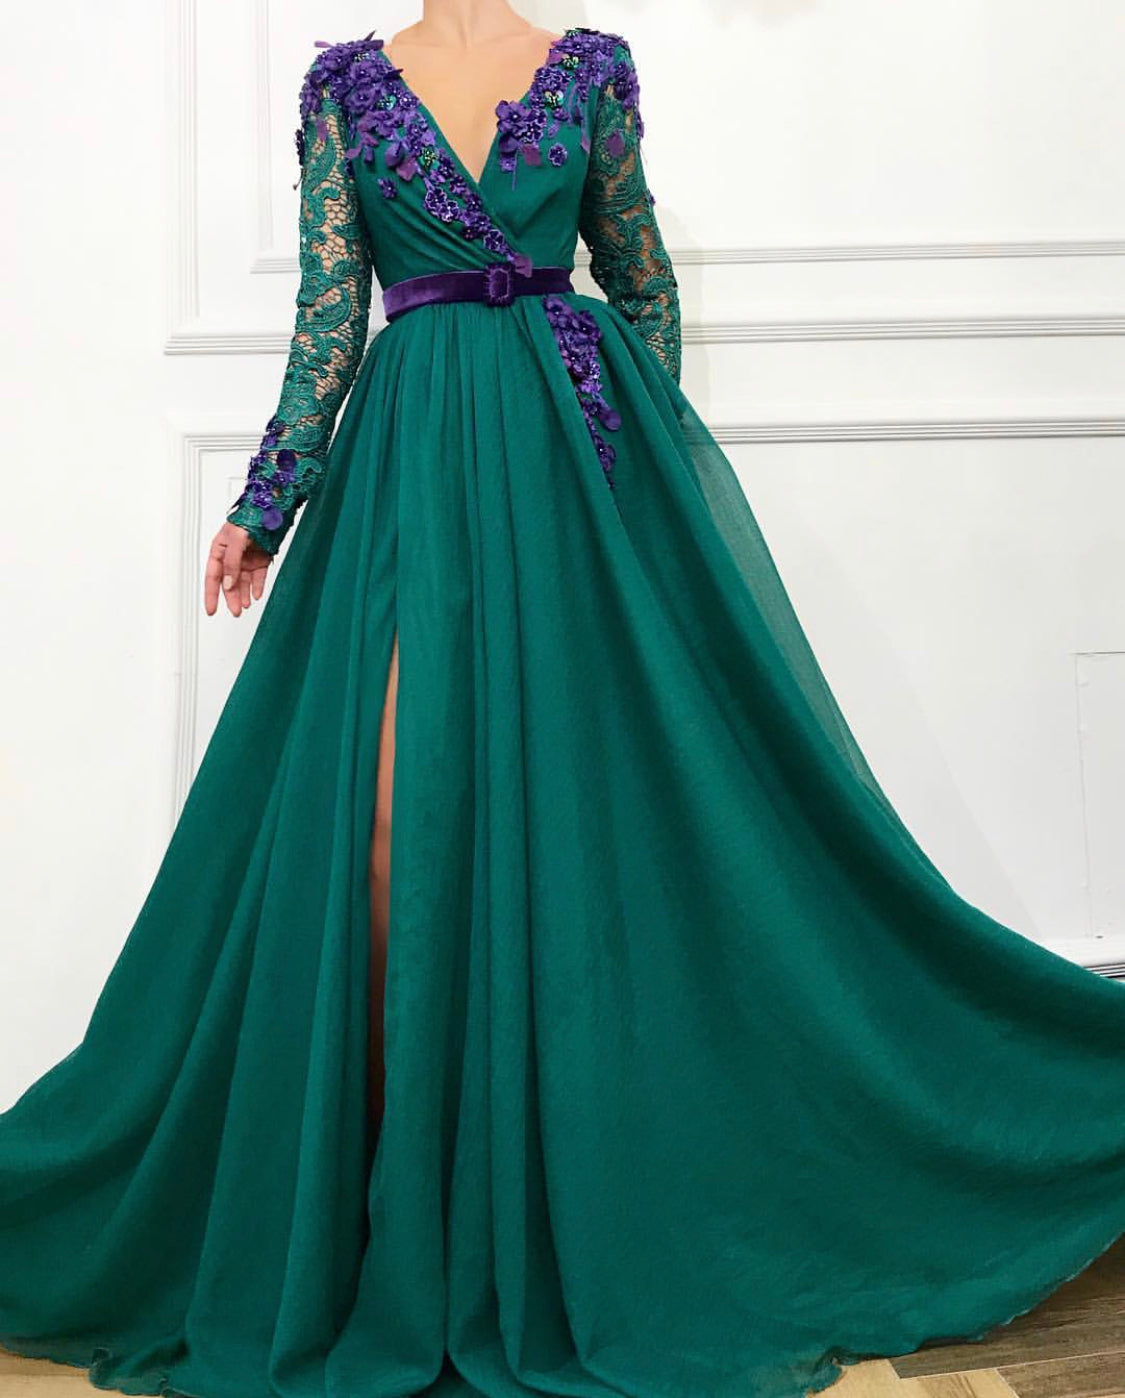 Green A-Line dress with long sleeves, v-neck, belt and embroidery